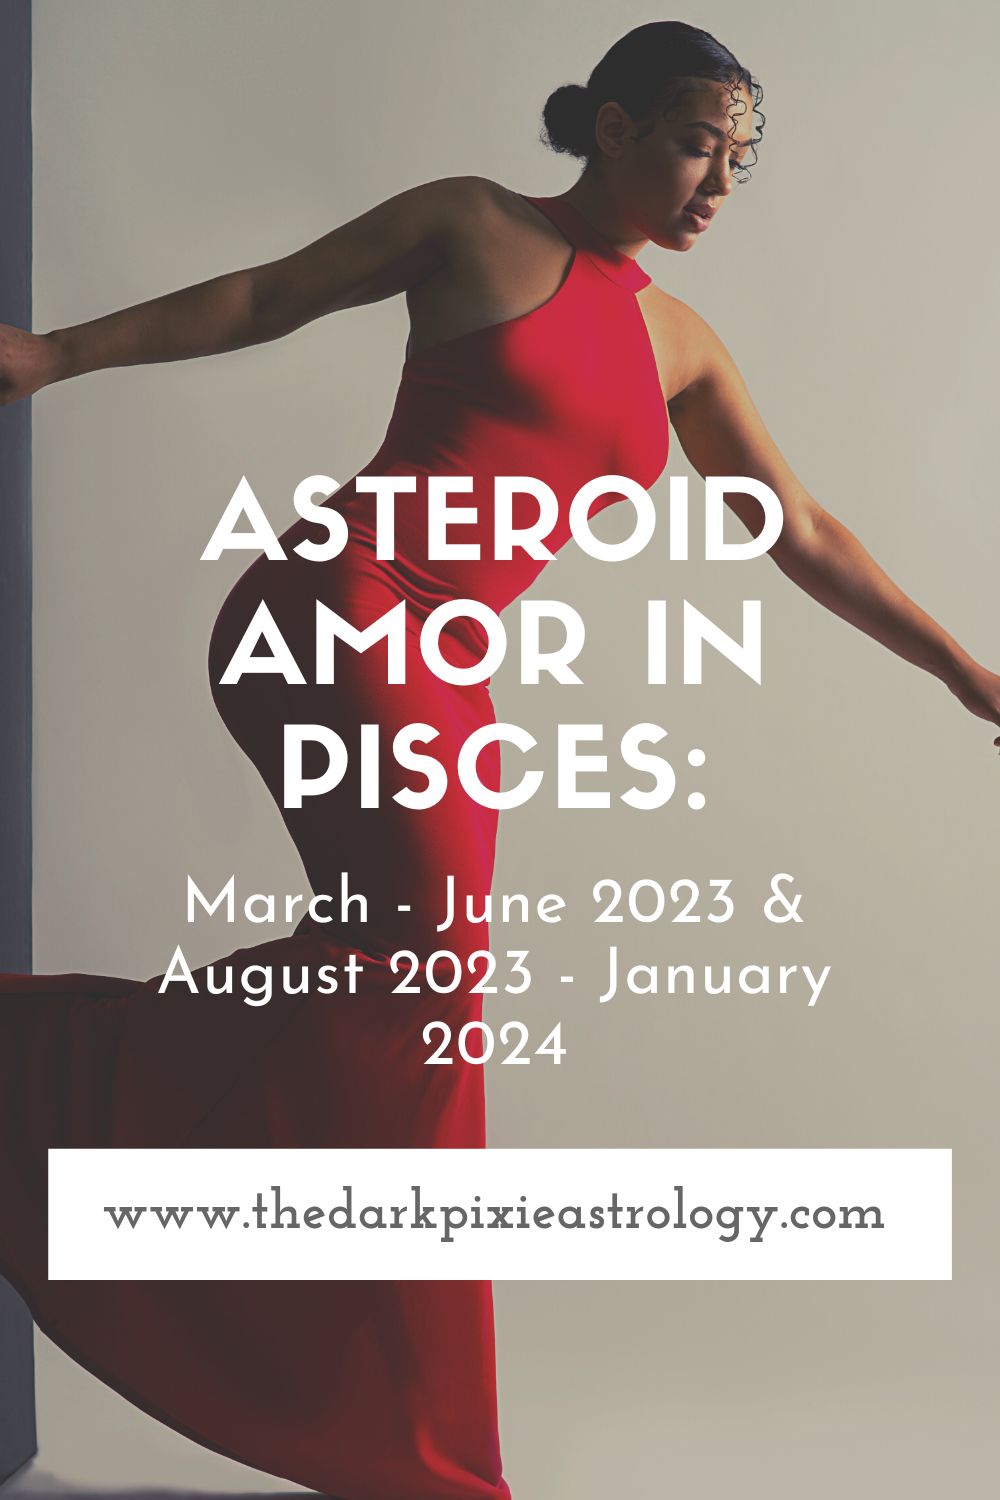 Asteroid Amor in Pisces: March - June 2023 & August 2023 - January 2024 - The Dark Pixie Astrology